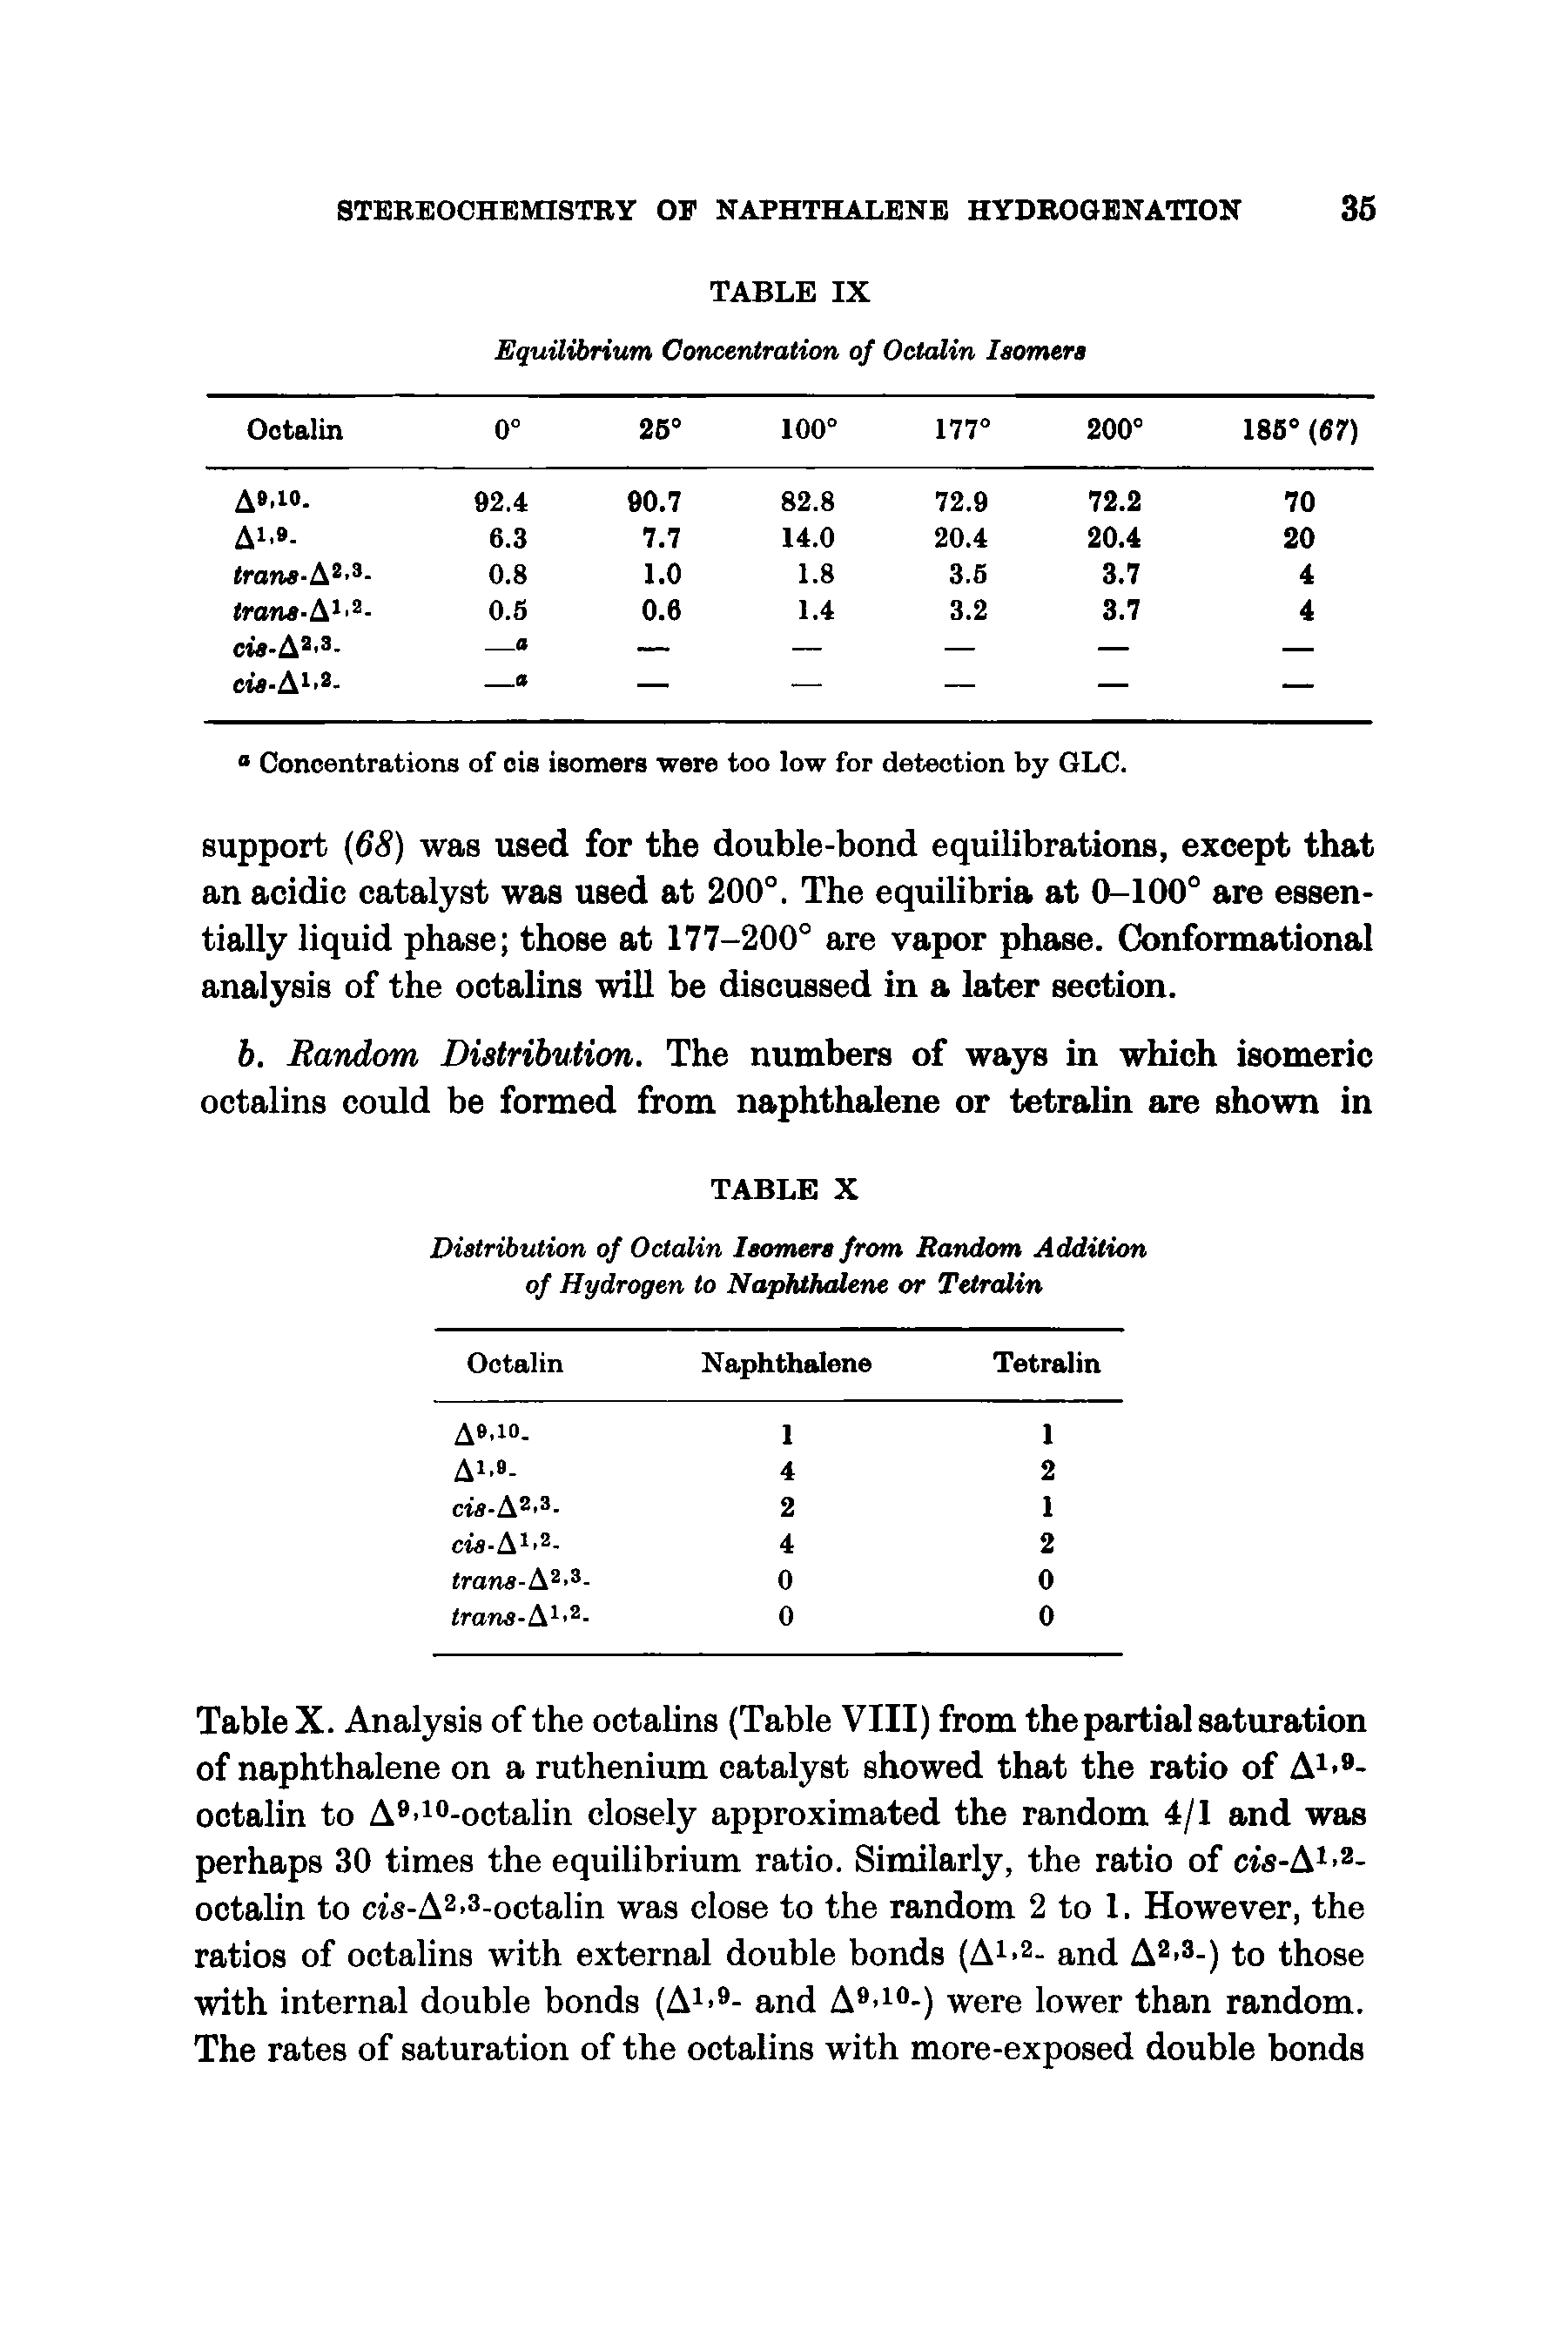 Table X. Analysis of the octalins (Table VIII) from the partial saturation of naphthalene on a ruthenium catalyst showed that the ratio of A > -octalin to A i -octalin closely approximated the random 4/1 and was perhaps 30 times the equilibrium ratio. Similarly, the ratio of cis-Ai> -octalin to cis-A. s-octalin was close to the random 2 to 1. However, the ratios of octalins with external double bonds (Ai>2- and A > -) to those with internal double bonds (Ai - and A i -) were lower than random. The rates of saturation of the octalins with more-exposed double bonds...